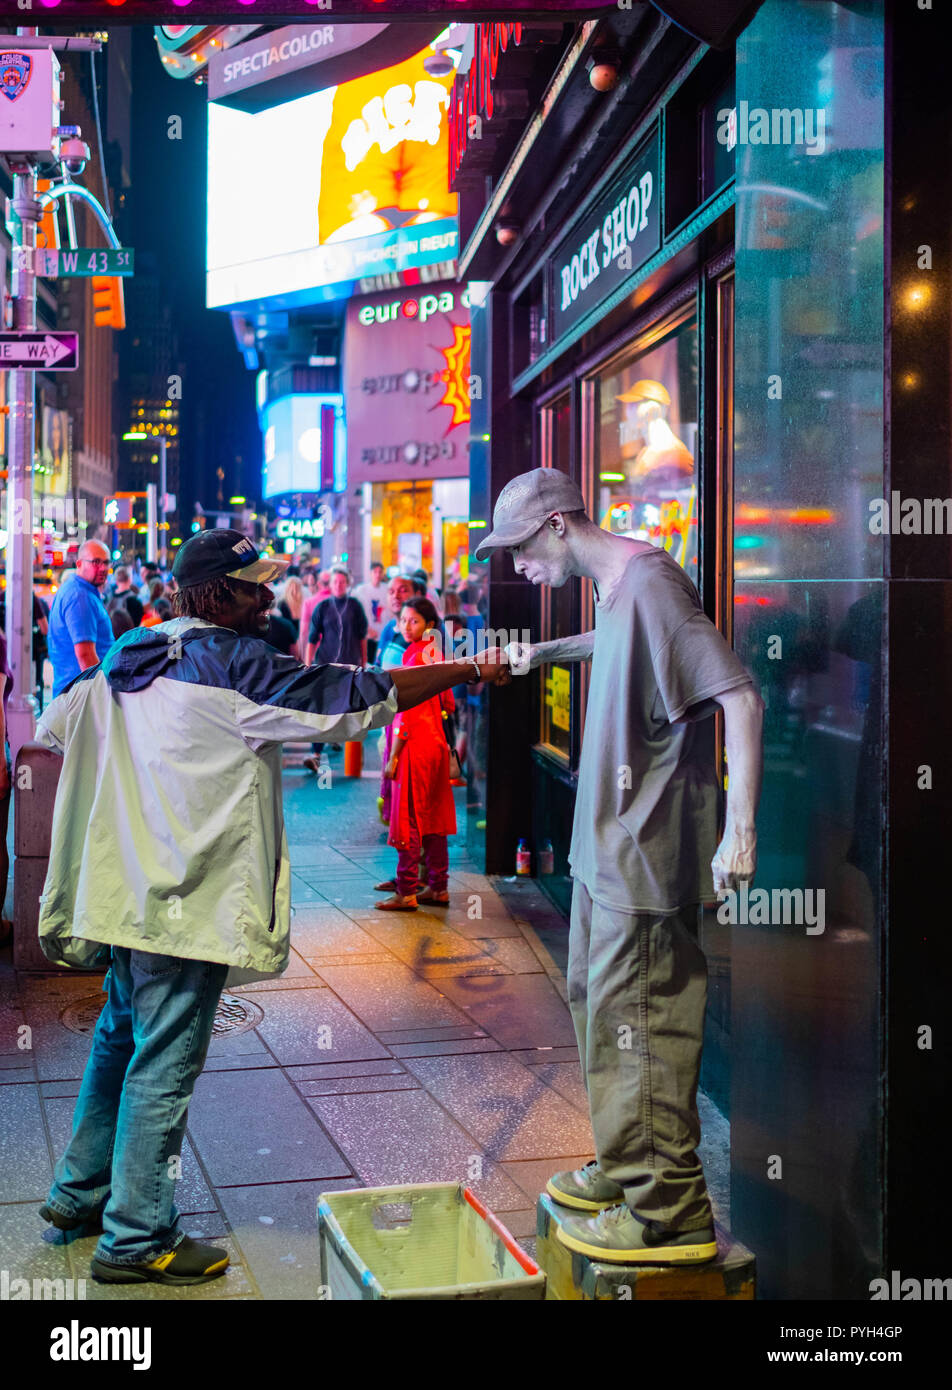 A local man fist pumps a street performer in Times Square, Midtown, Manhattan, on a busy night in front of the neon lights Stock Photo